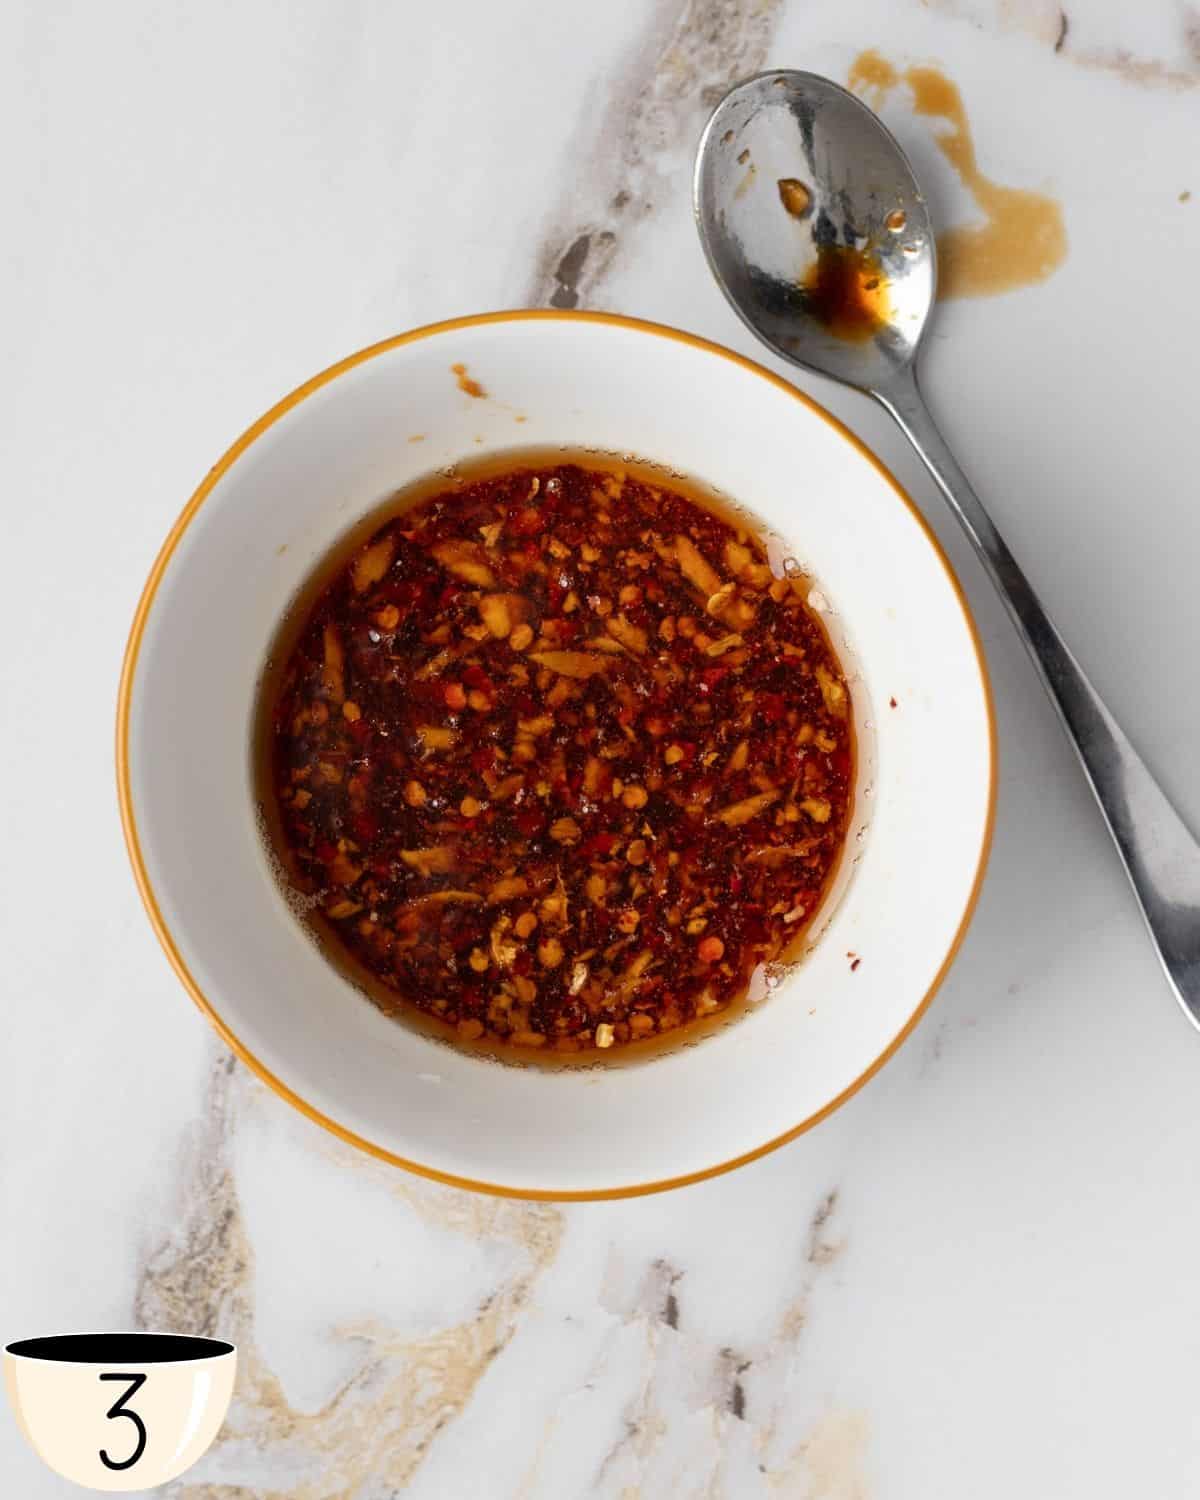 A bowl of spicy sauce mixture for noodle seasoning, with visible chili flakes and oil.